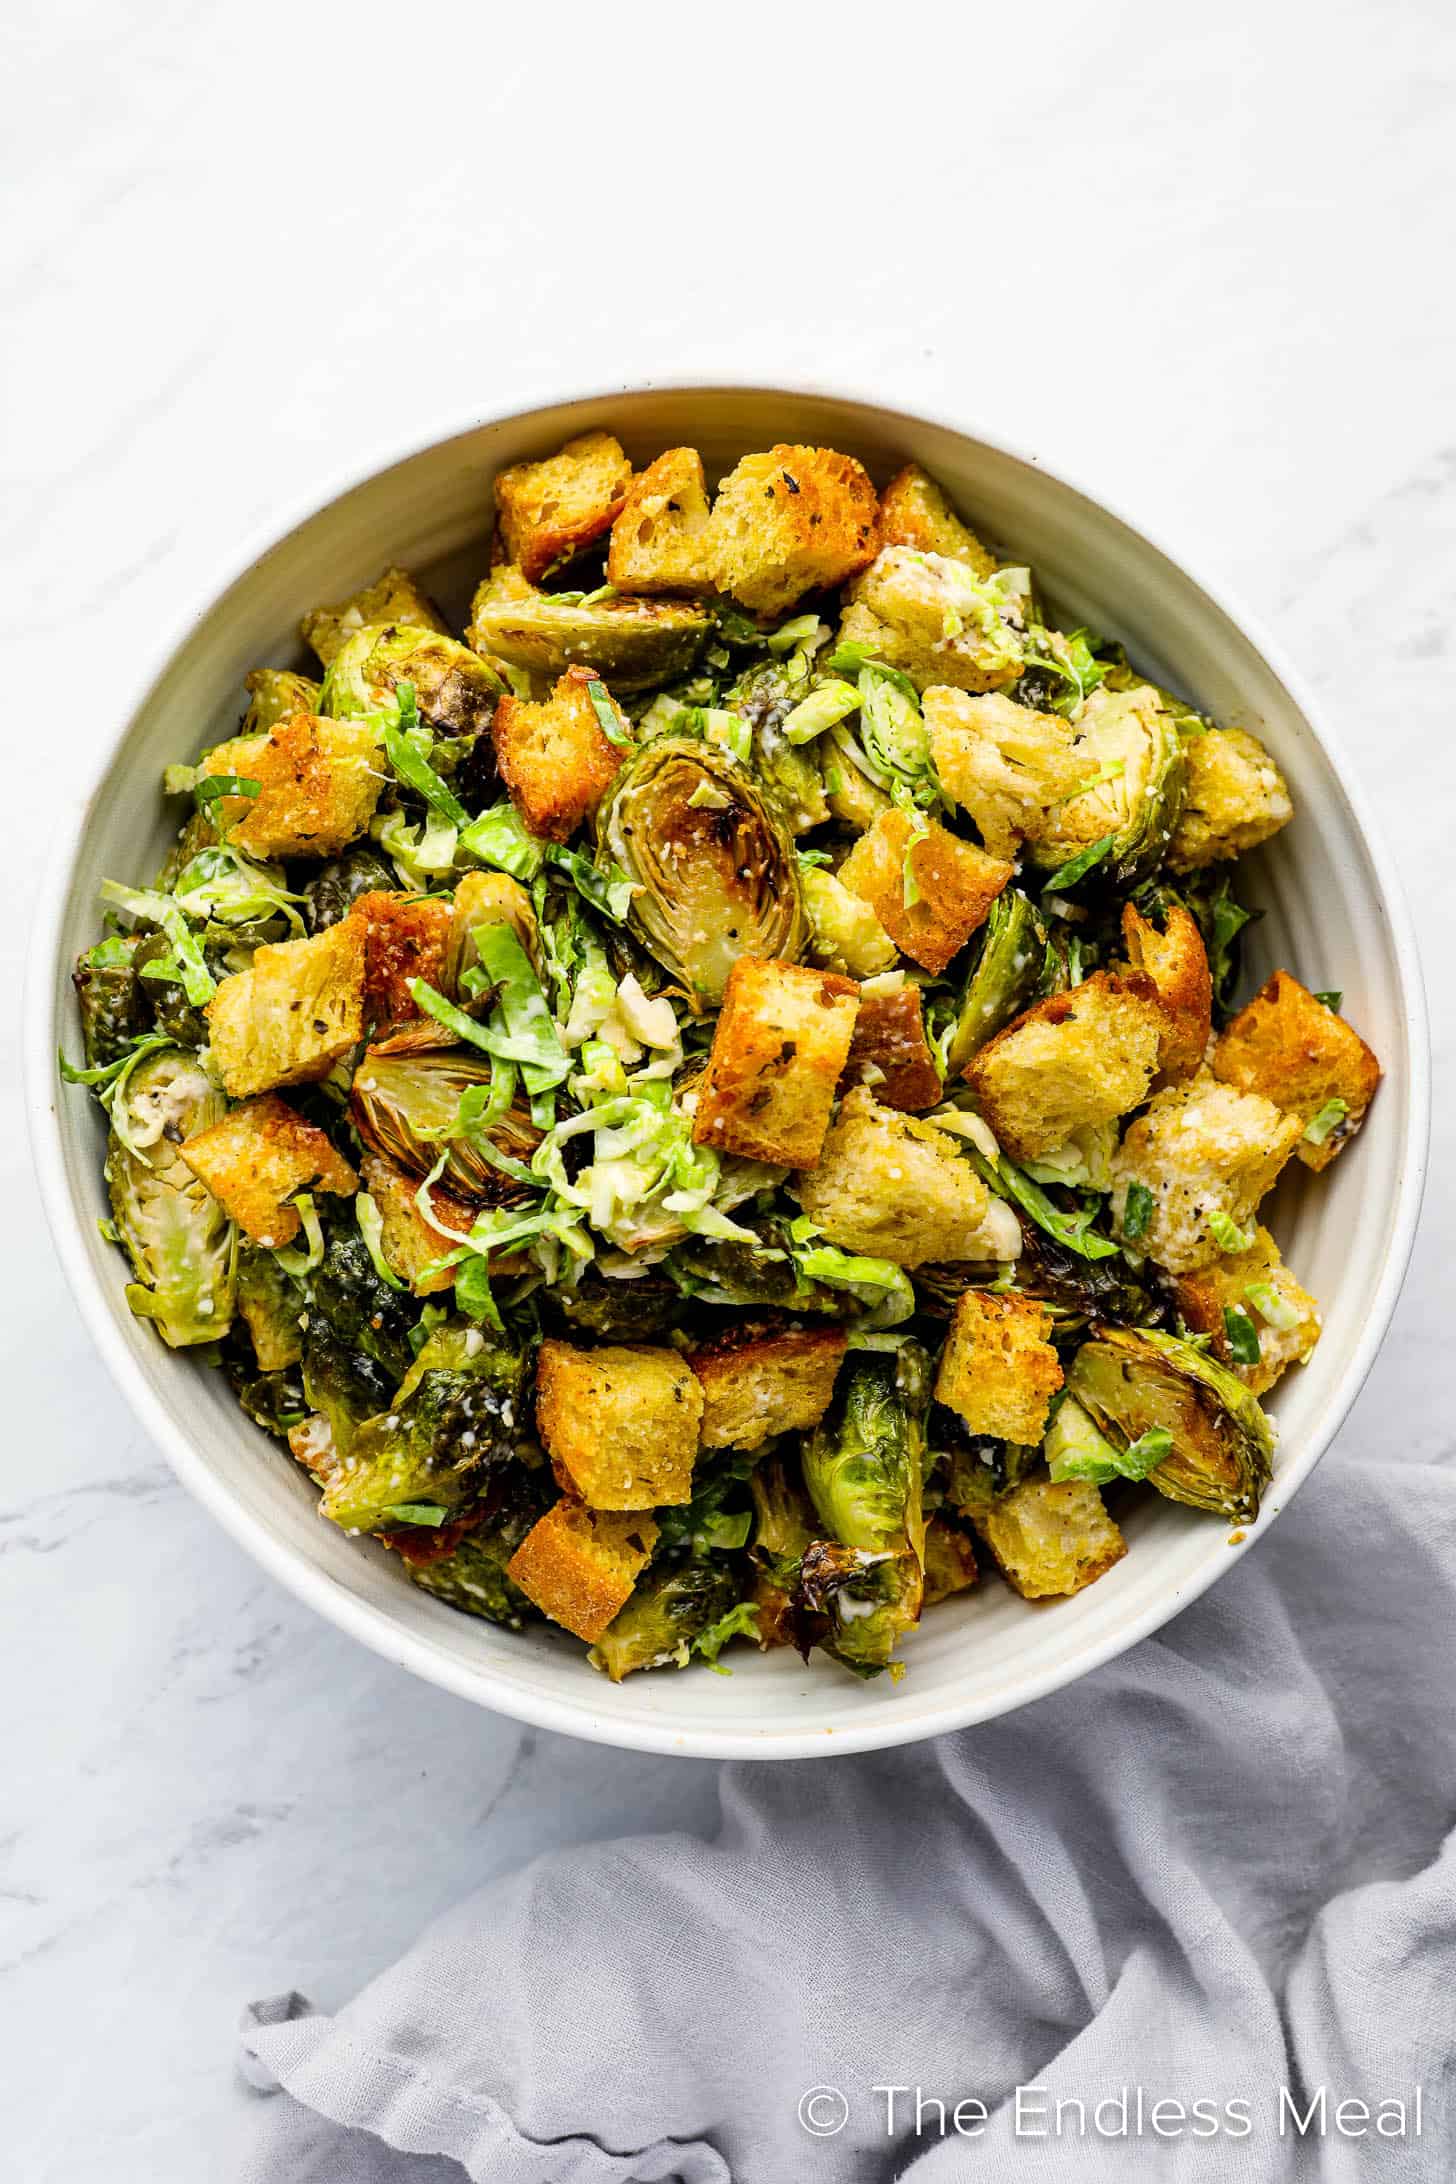 A salad bowl with caesar salad made with brussels sprouts and croutons